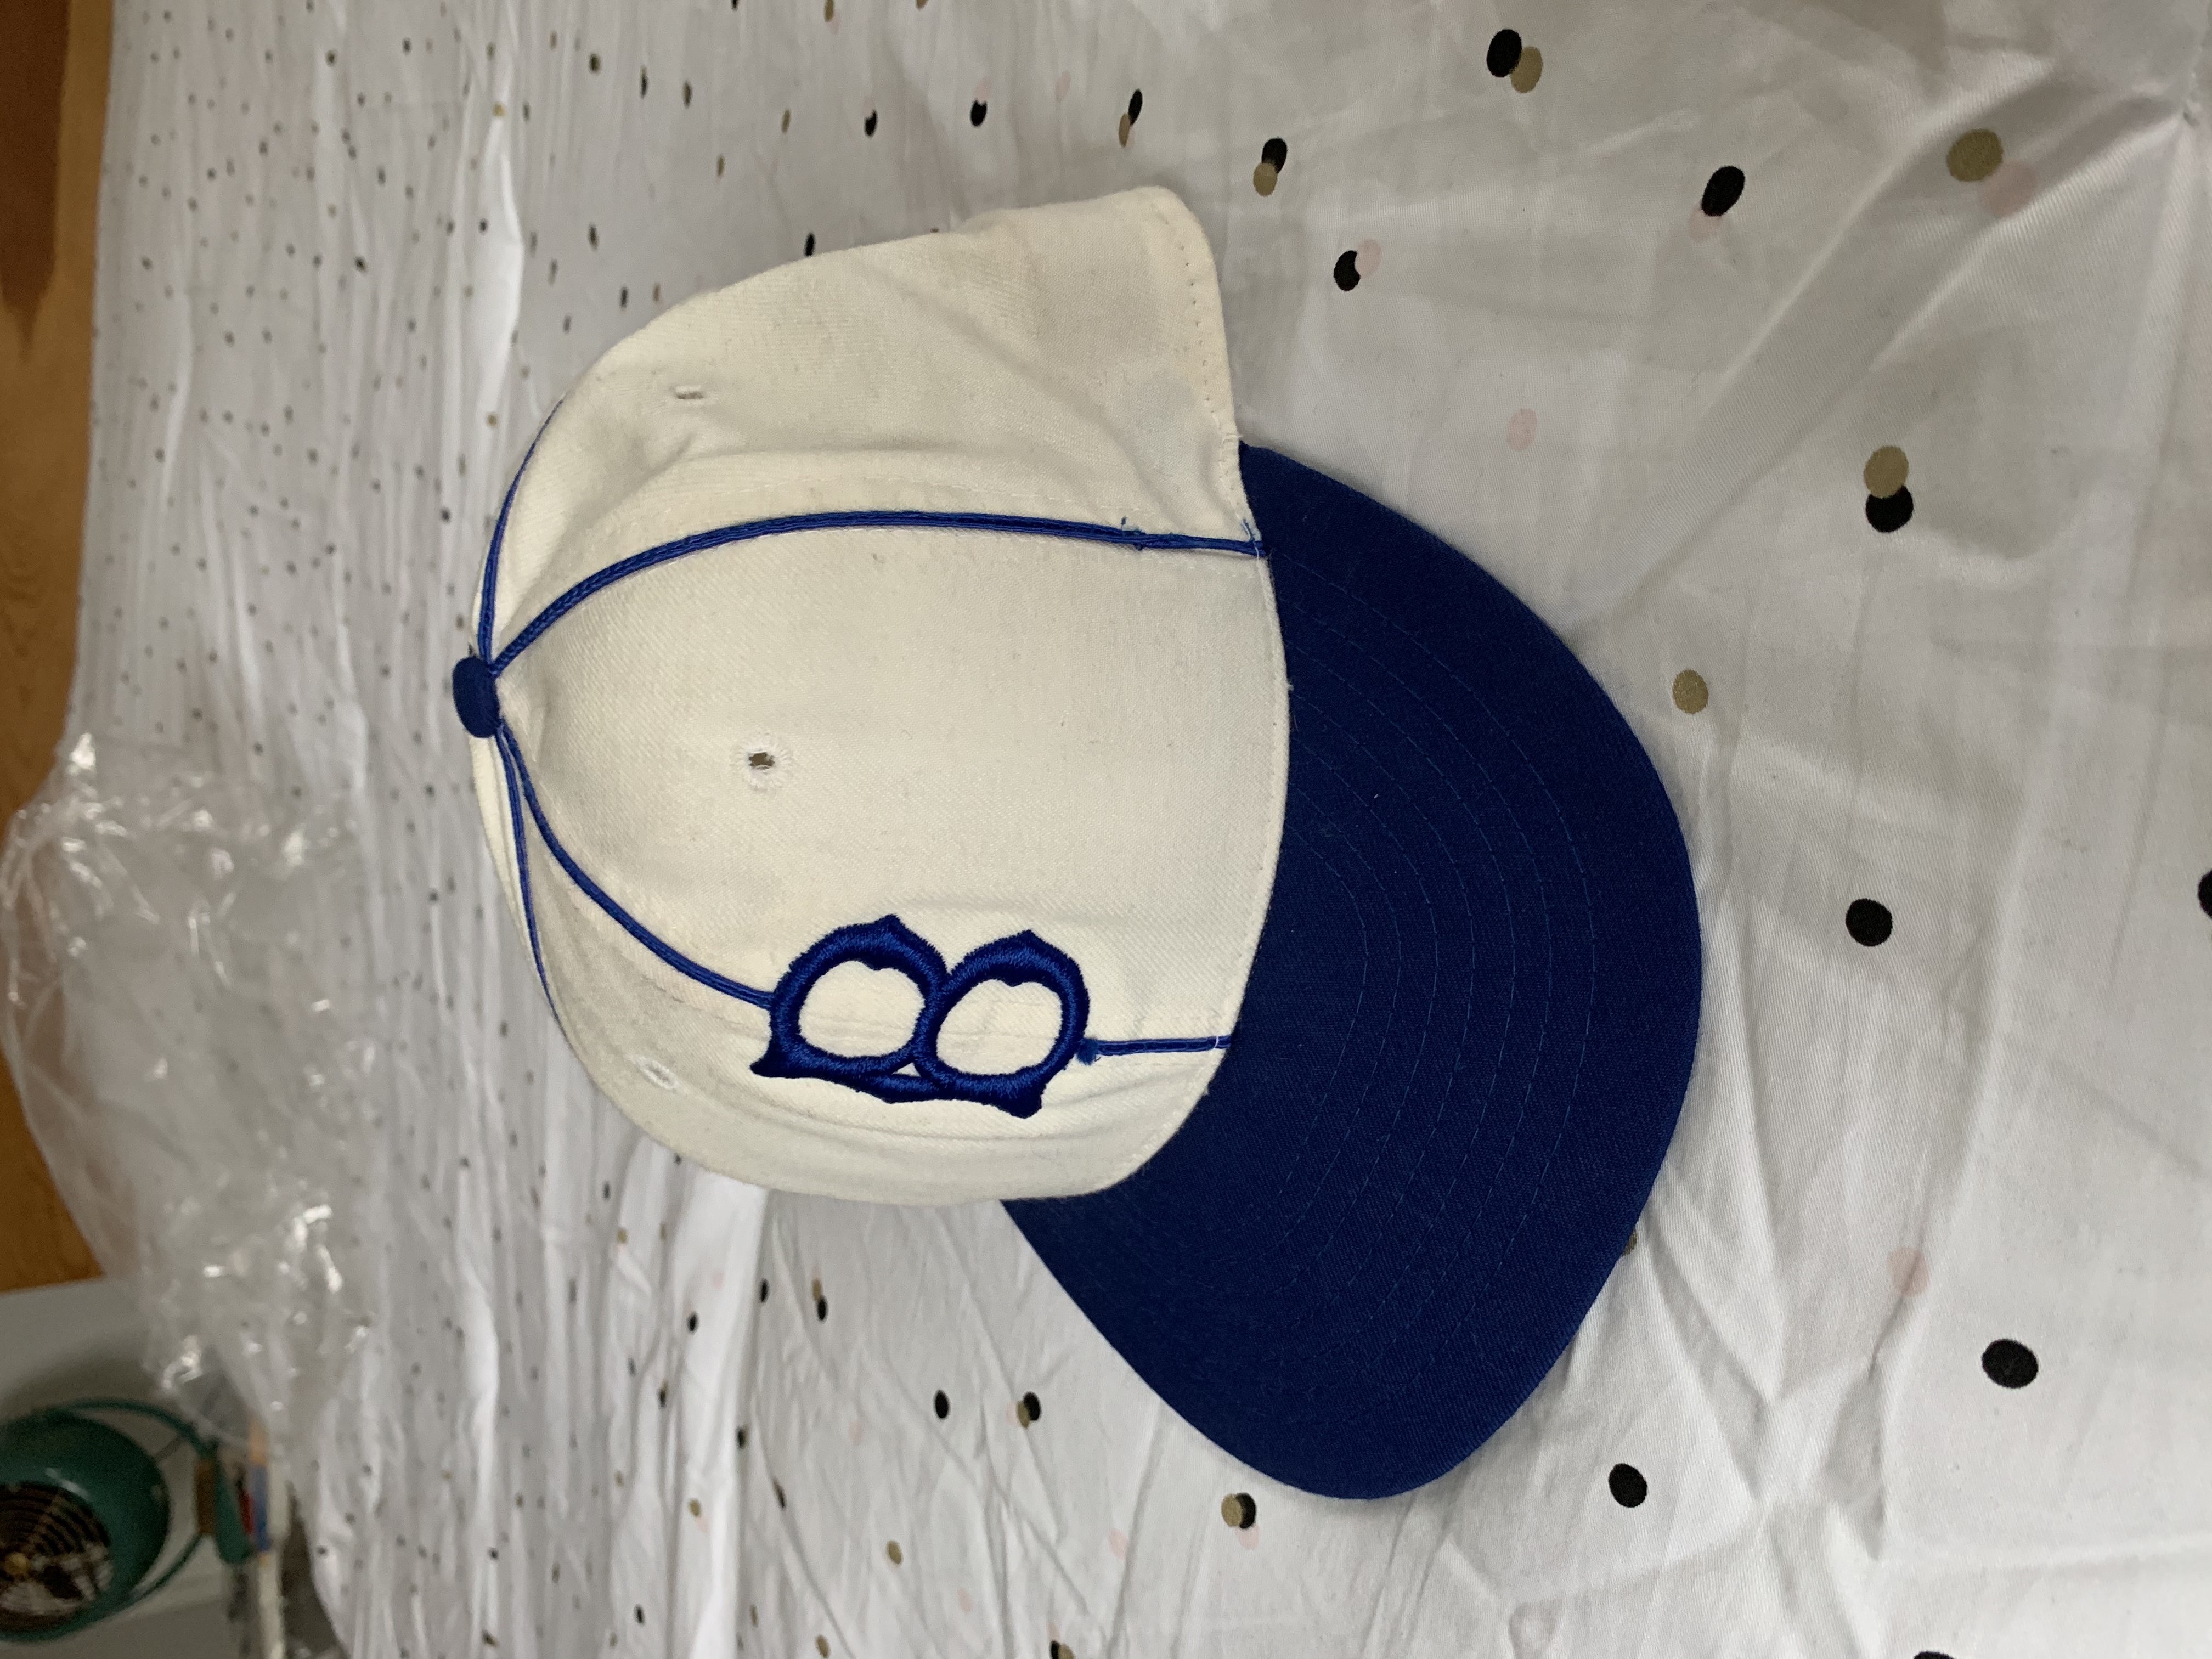 cooperstown collection brooklyn dodgers